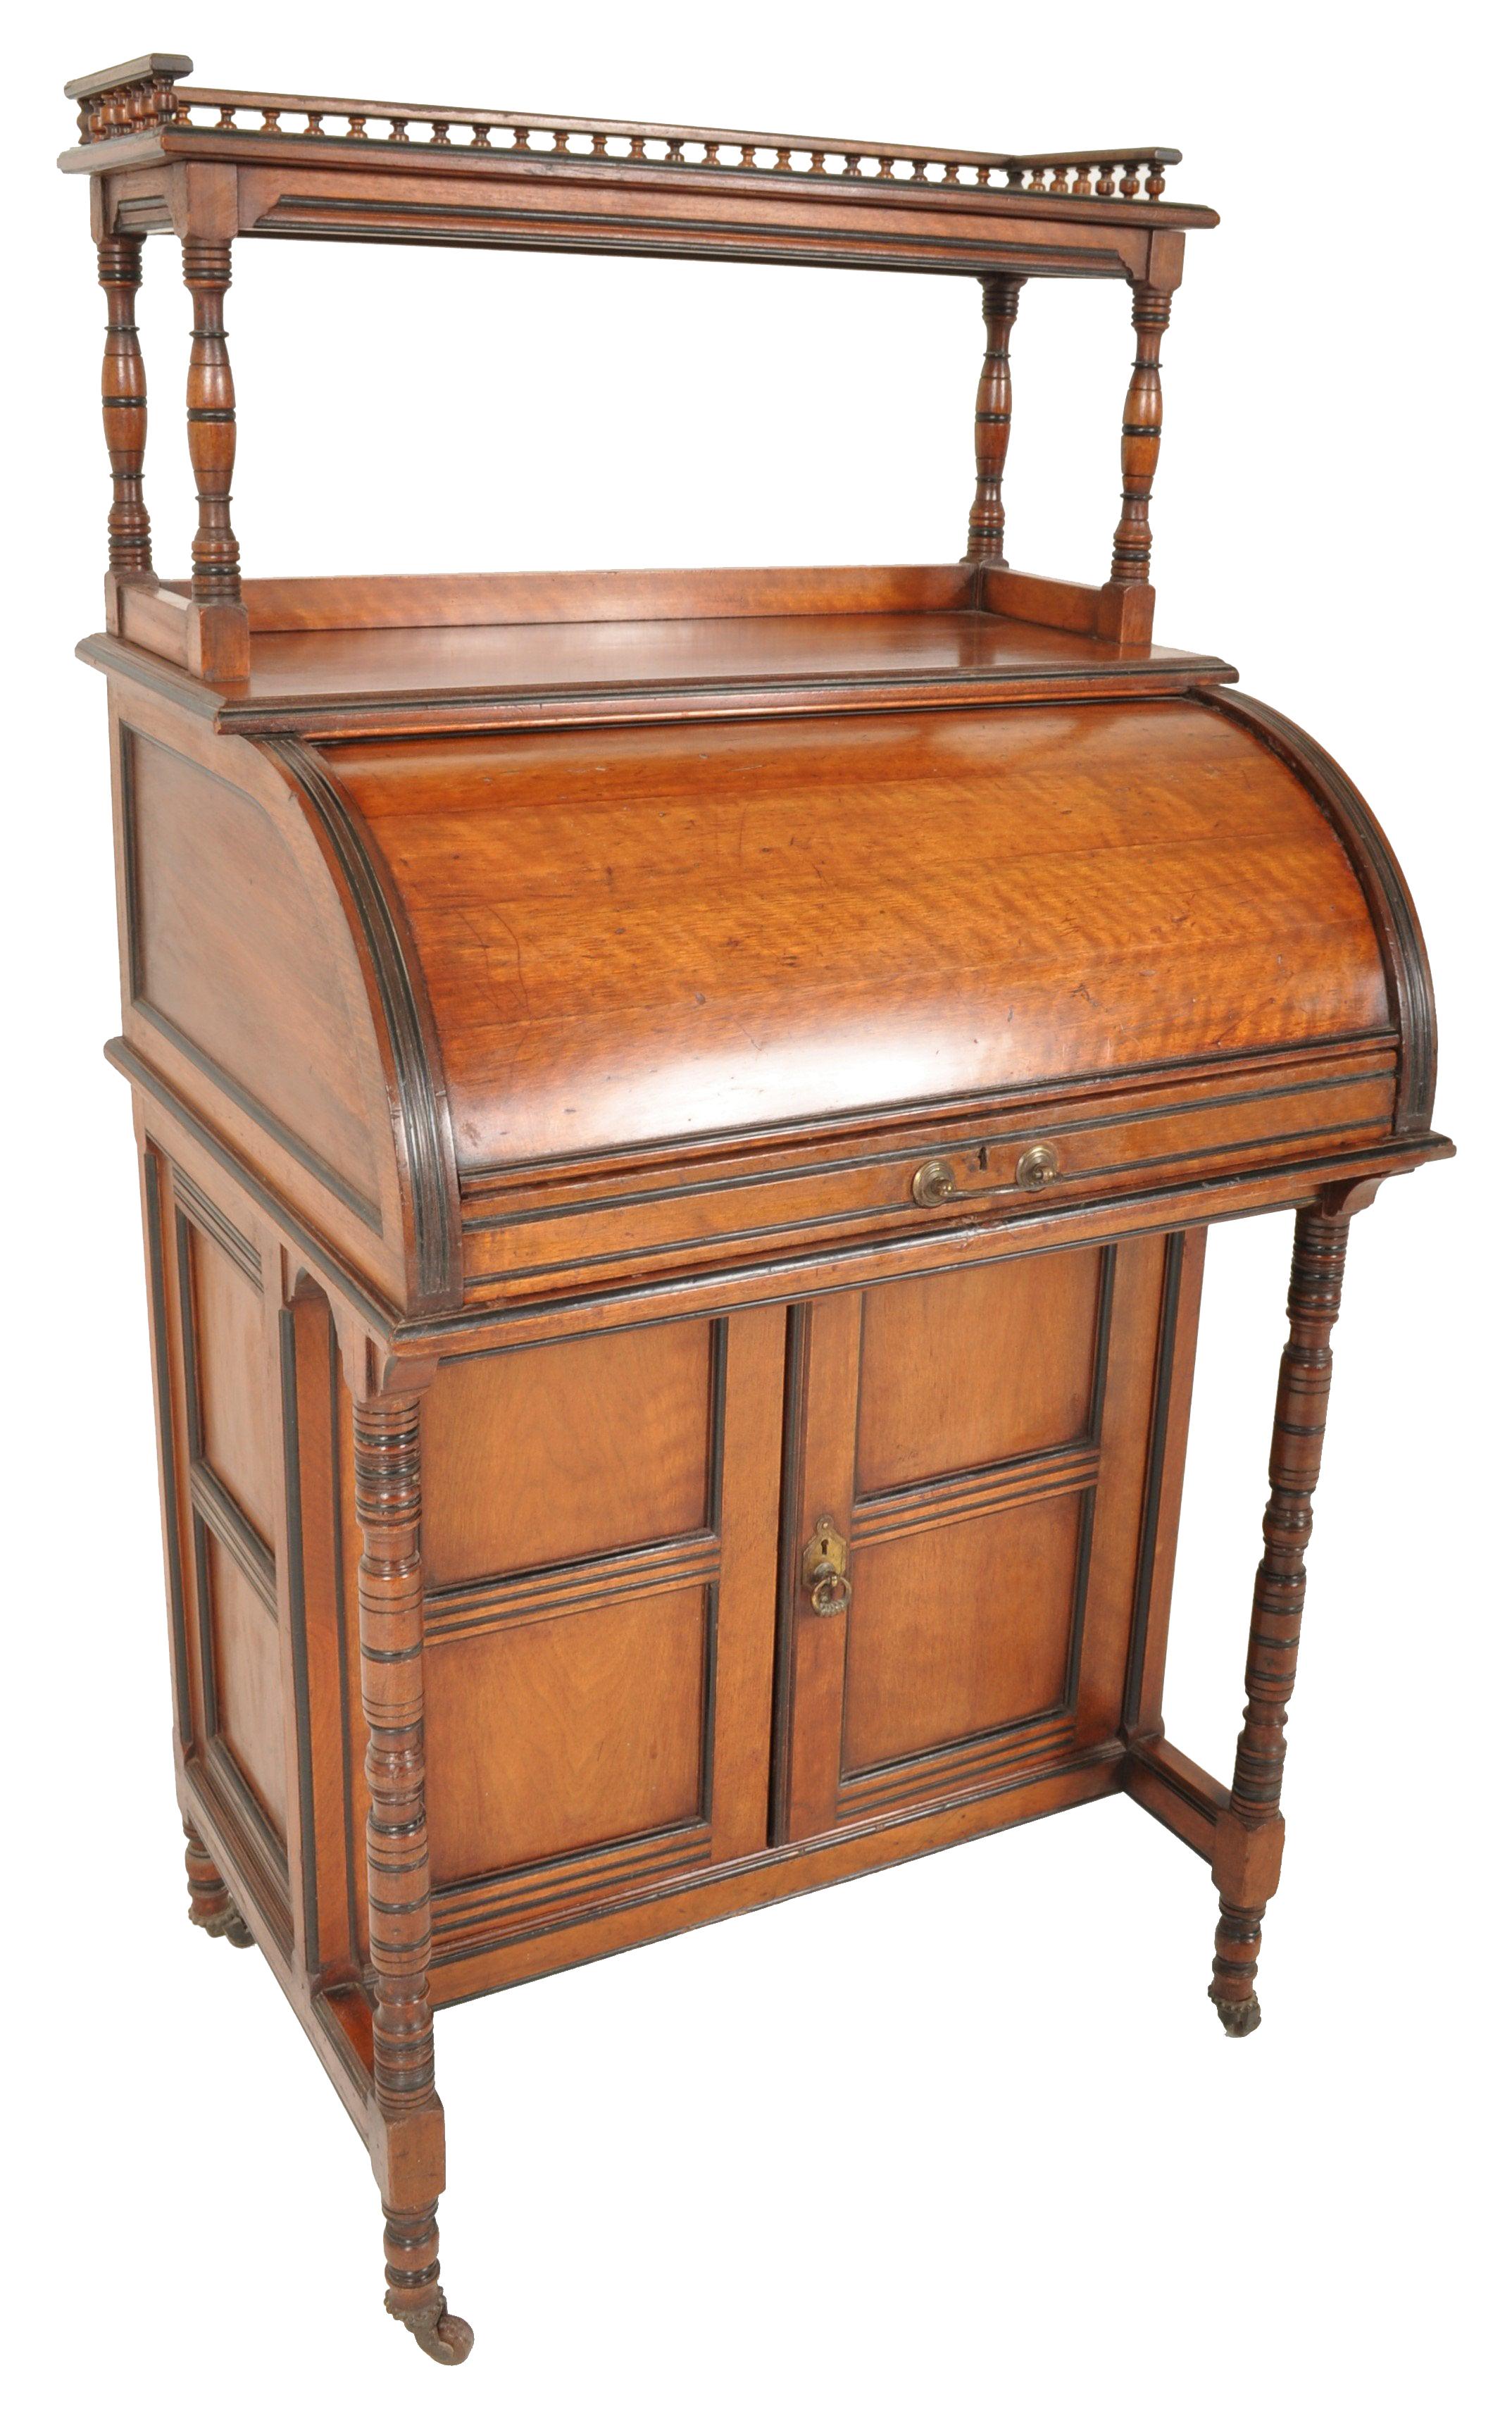 Antique Victorian aesthetic movement walnut cylinder davenport desk, circa 1875. The desk having a spindled gallery supported by turned columns with ebonized decoration, below a cylinder desk which pulls out to reveal a fitted interior with an